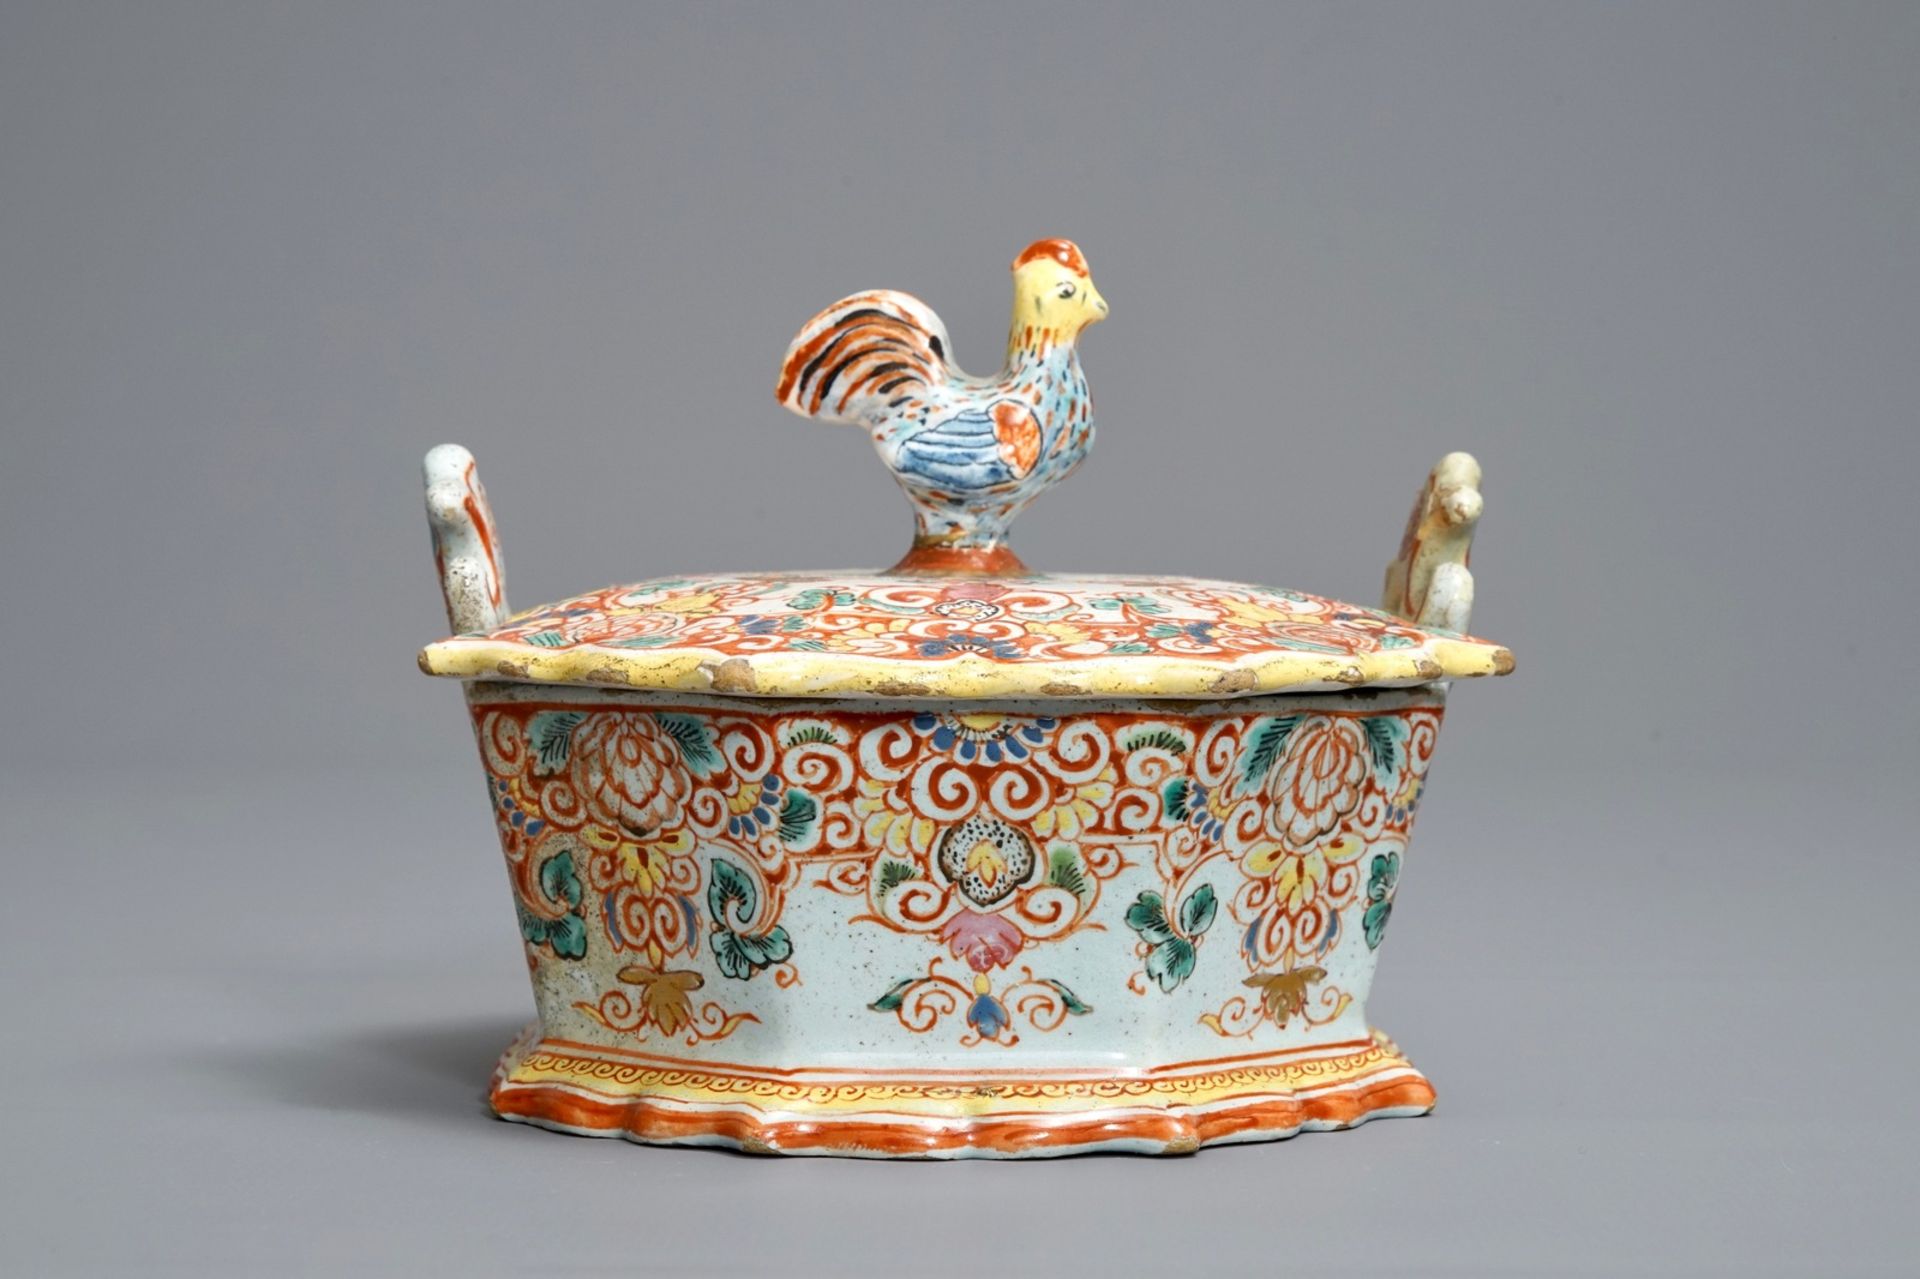 A polychrome petit feu and gilded Dutch Delft rooster-topped butter tub, 1st half 18th C. - Image 2 of 8